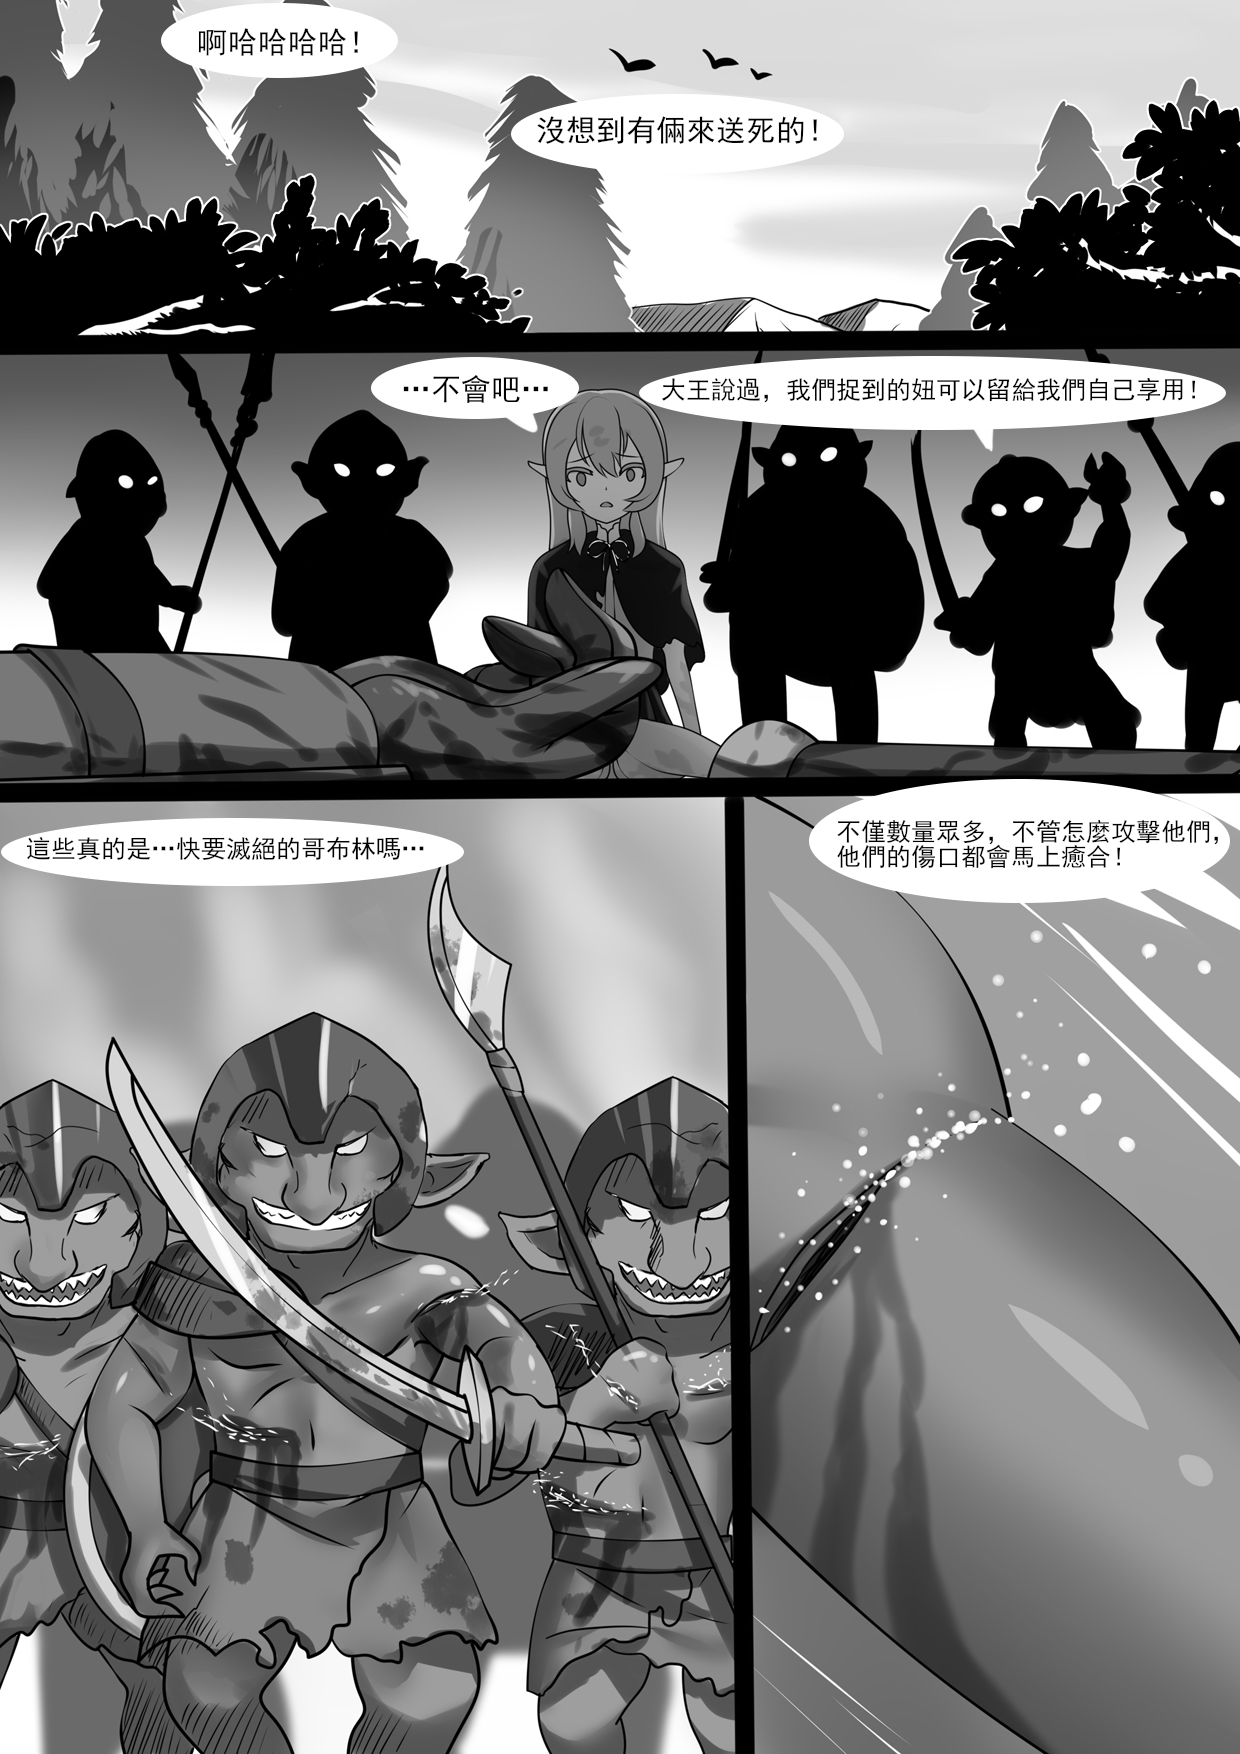 [WhitePH] Counterattack of Orcs 2 [Chinese] 